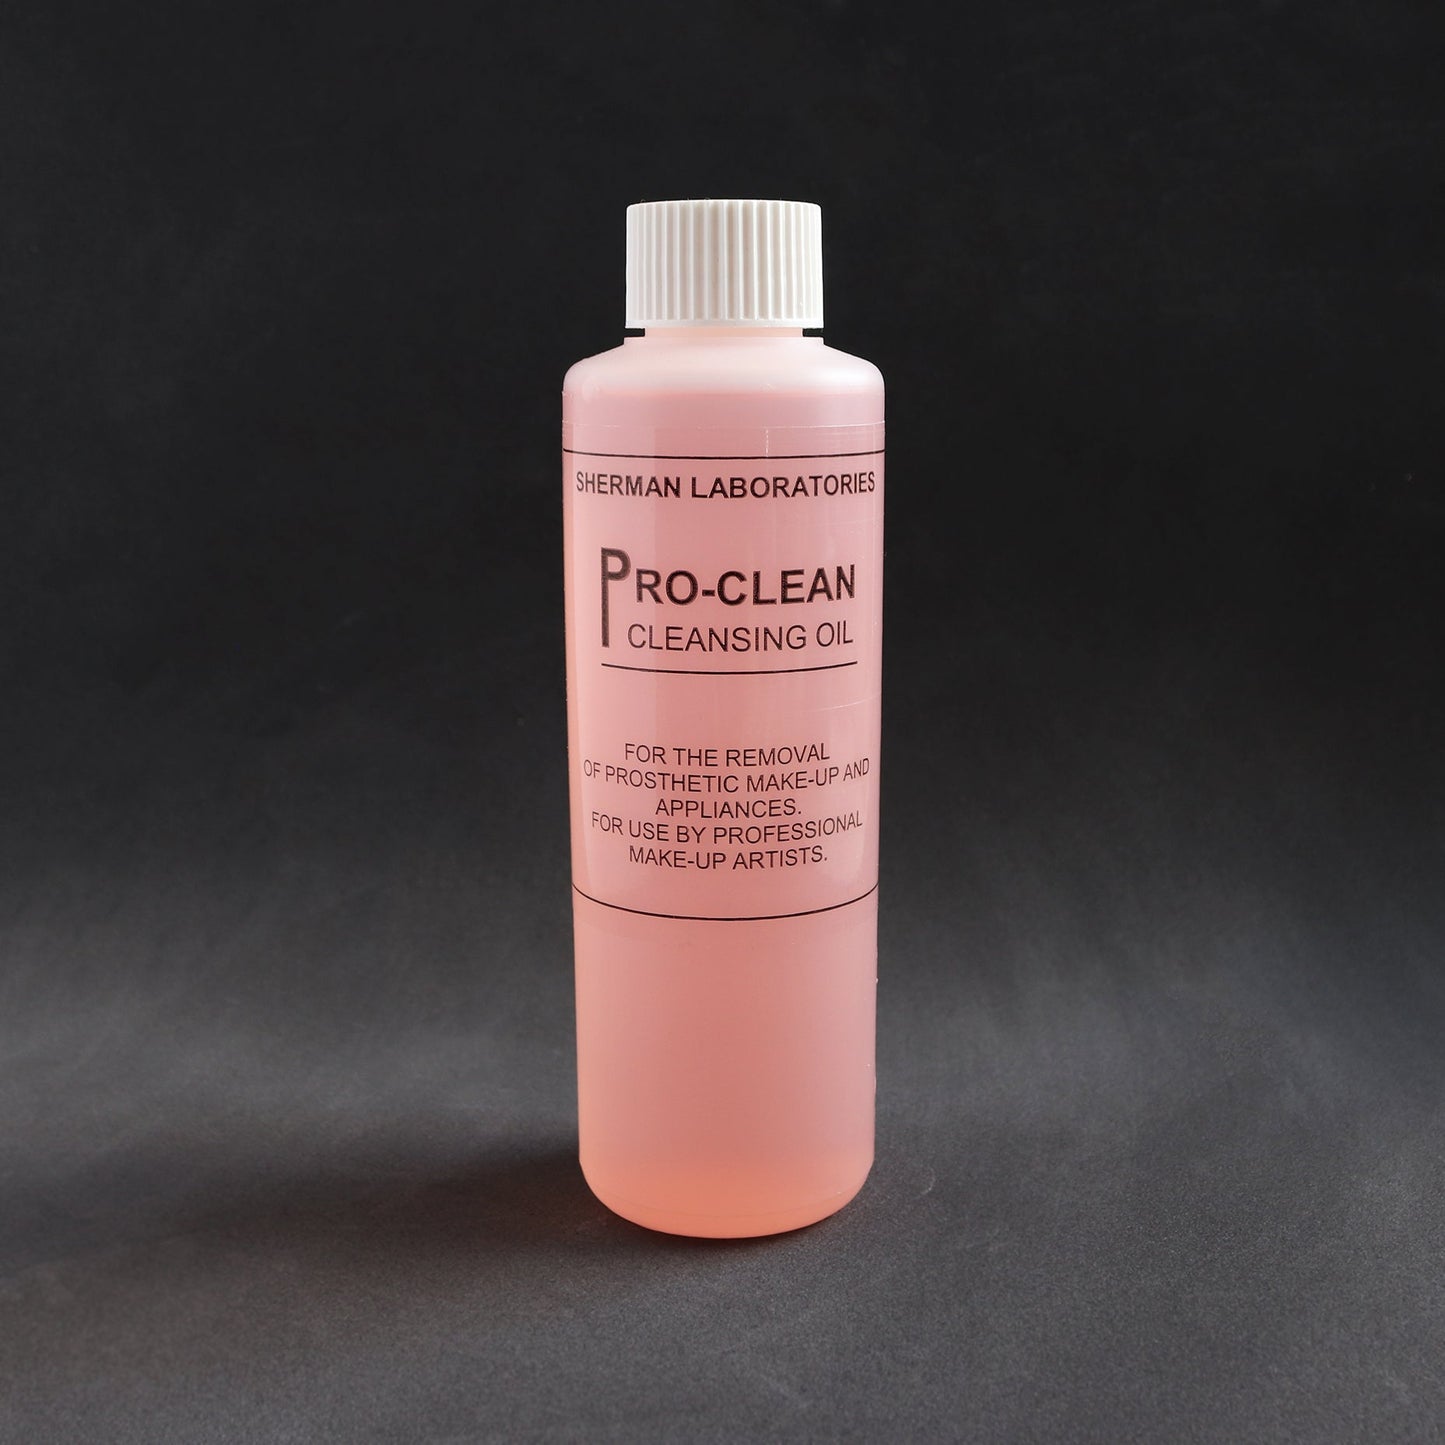 Bottle of ProClean (Silicone adhesive remover)